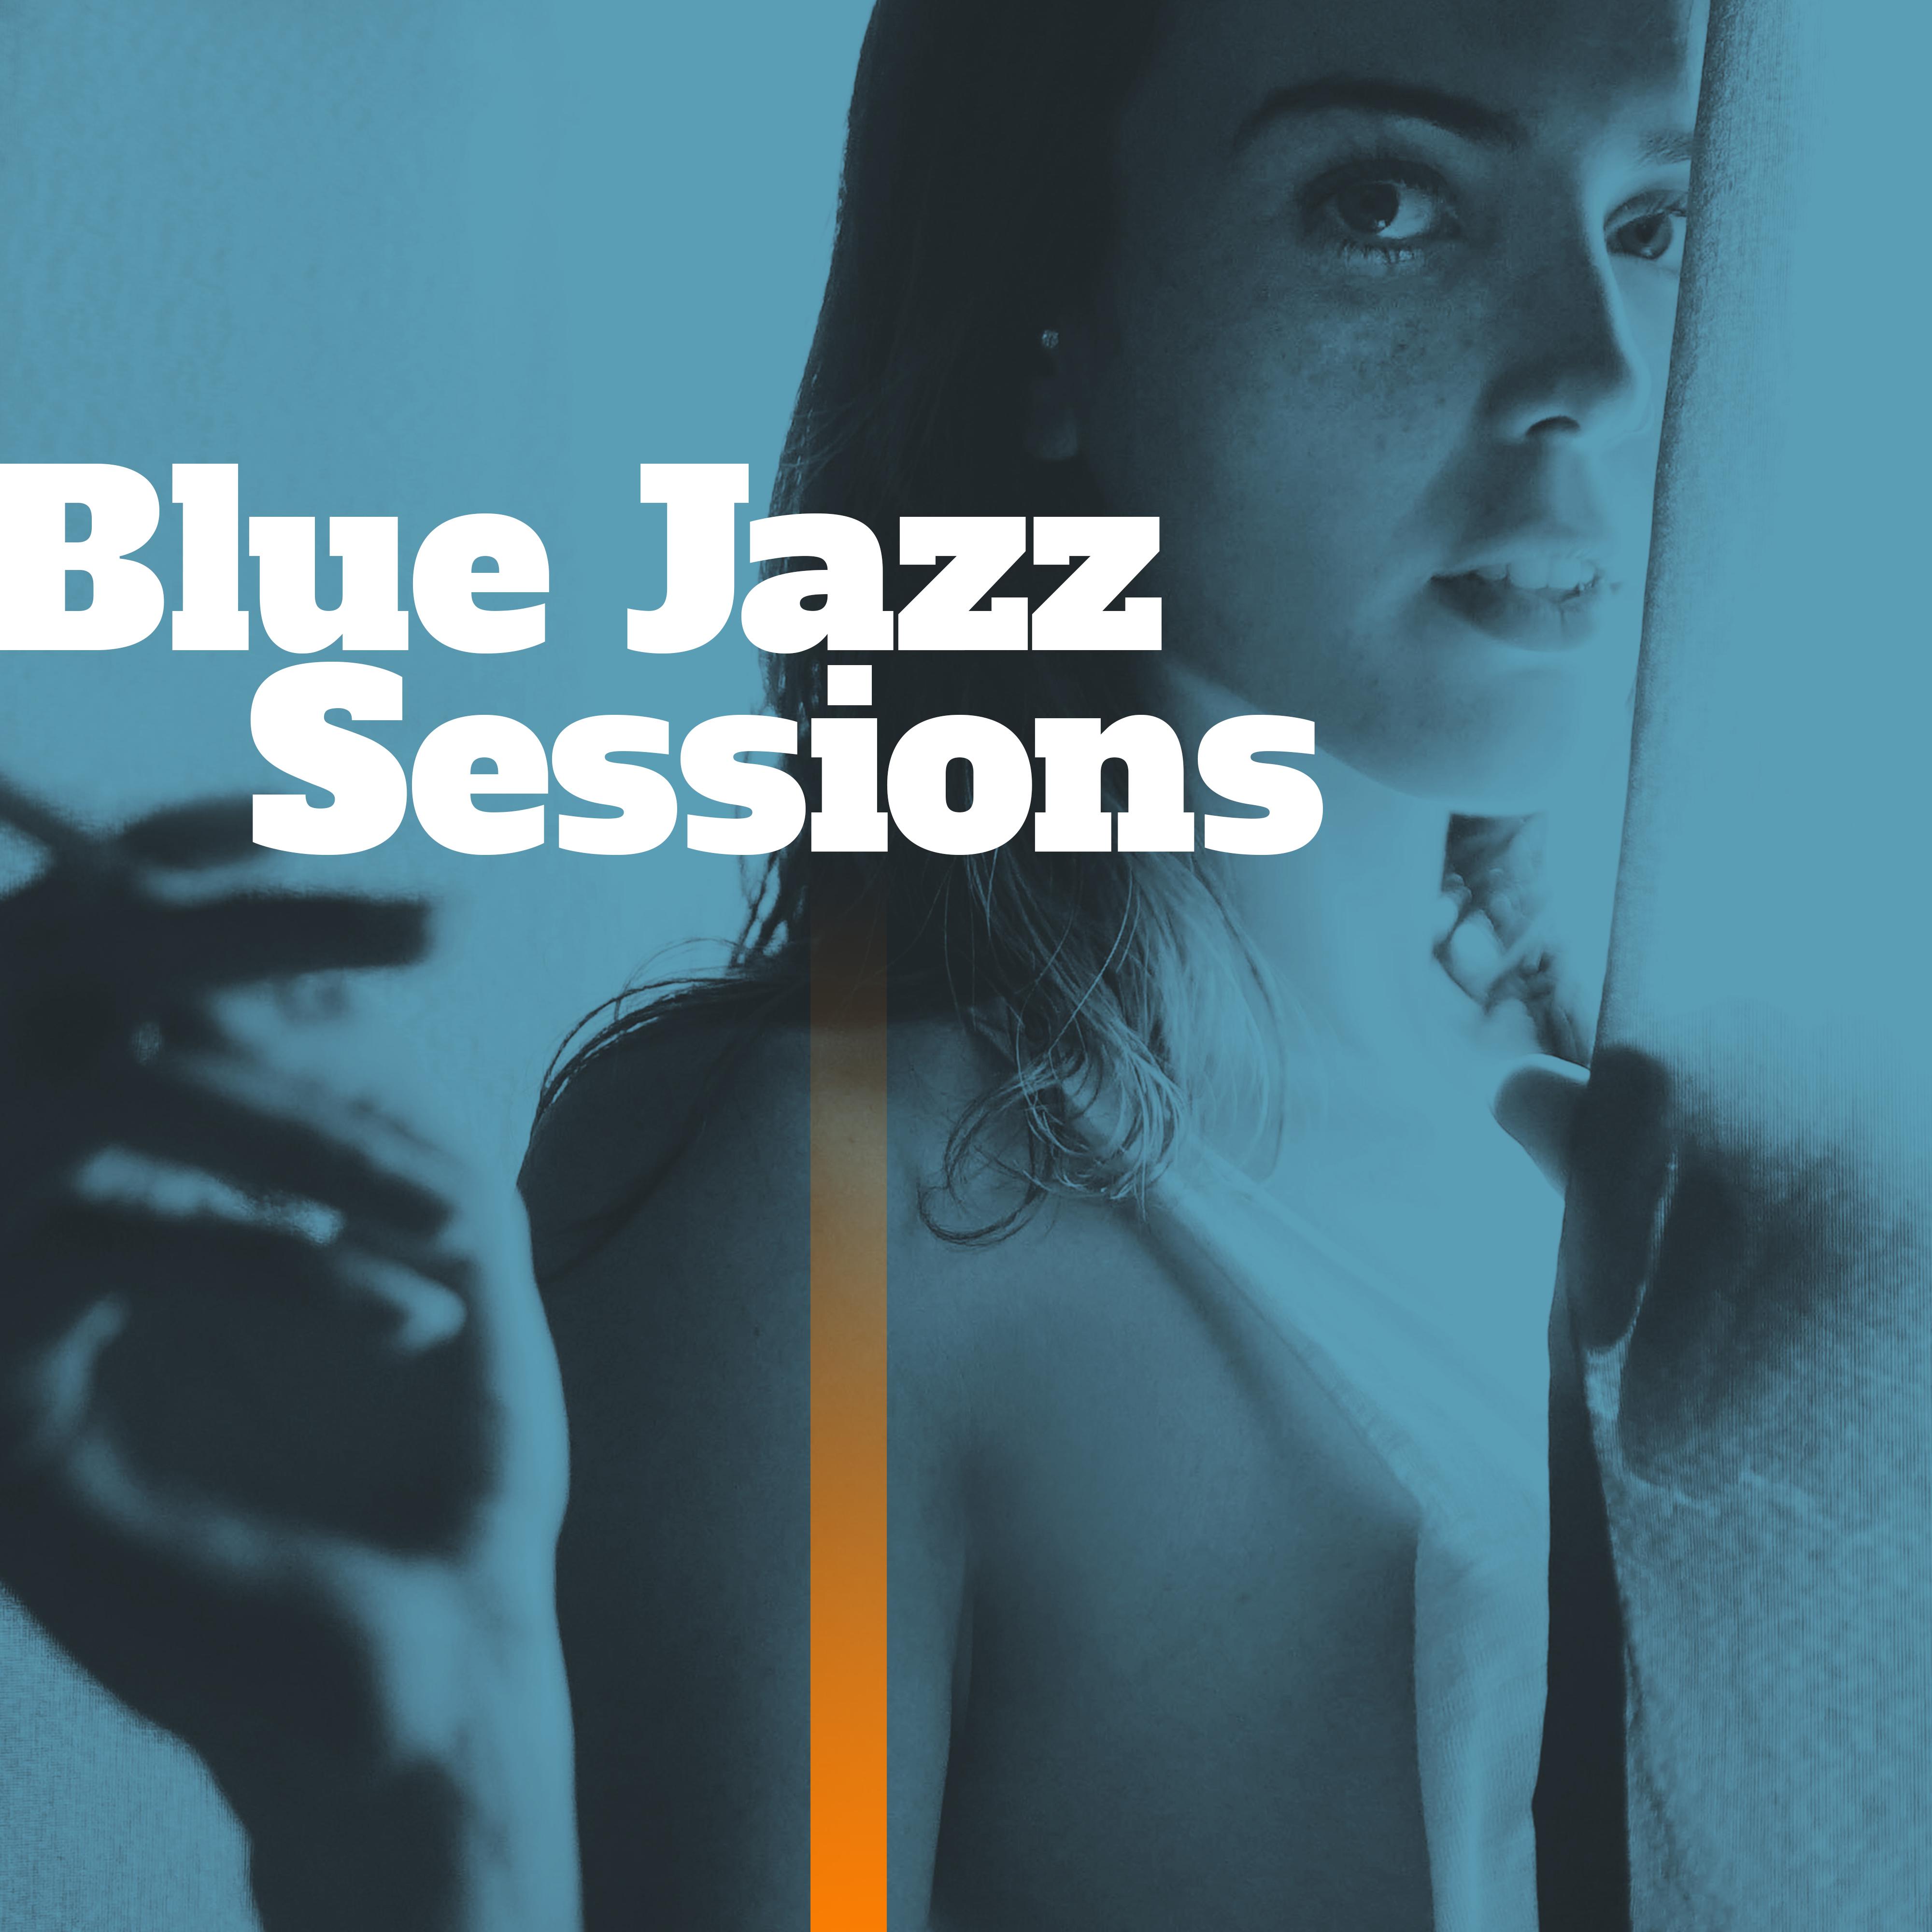 Blue Jazz Sessions – Ambient Instrumental Jazz, Mellow Piano Sounds, Jazz Ensemble, Relaxed Jazz